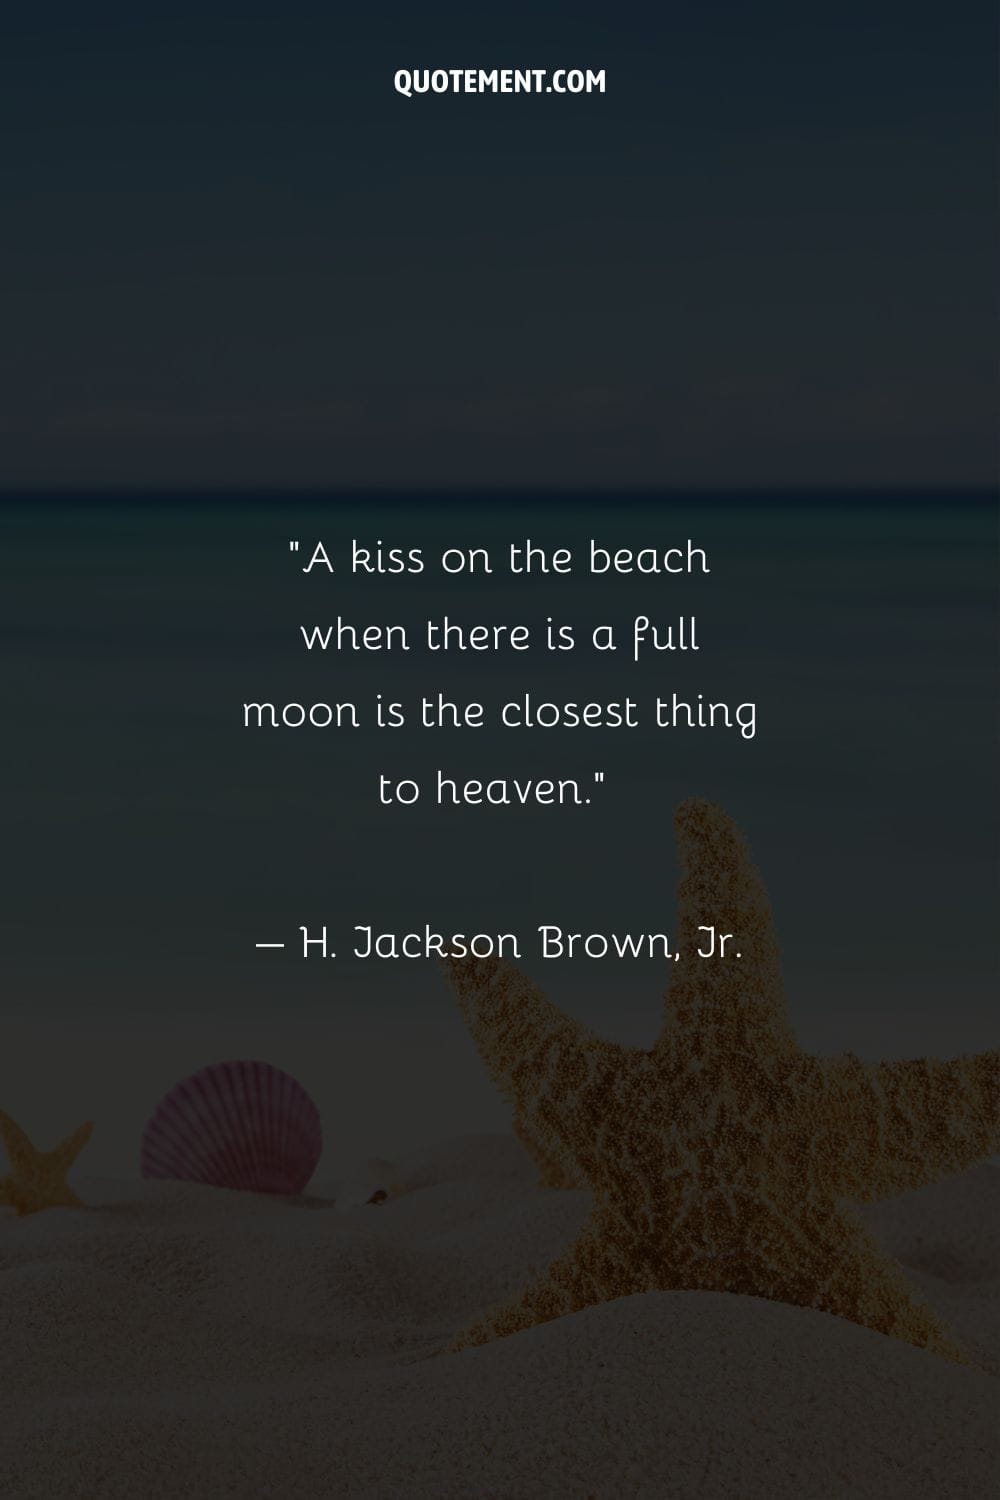 “A kiss on the beach when there is a full moon is the closest thing to heaven.” – H. Jackson Brown, Jr.